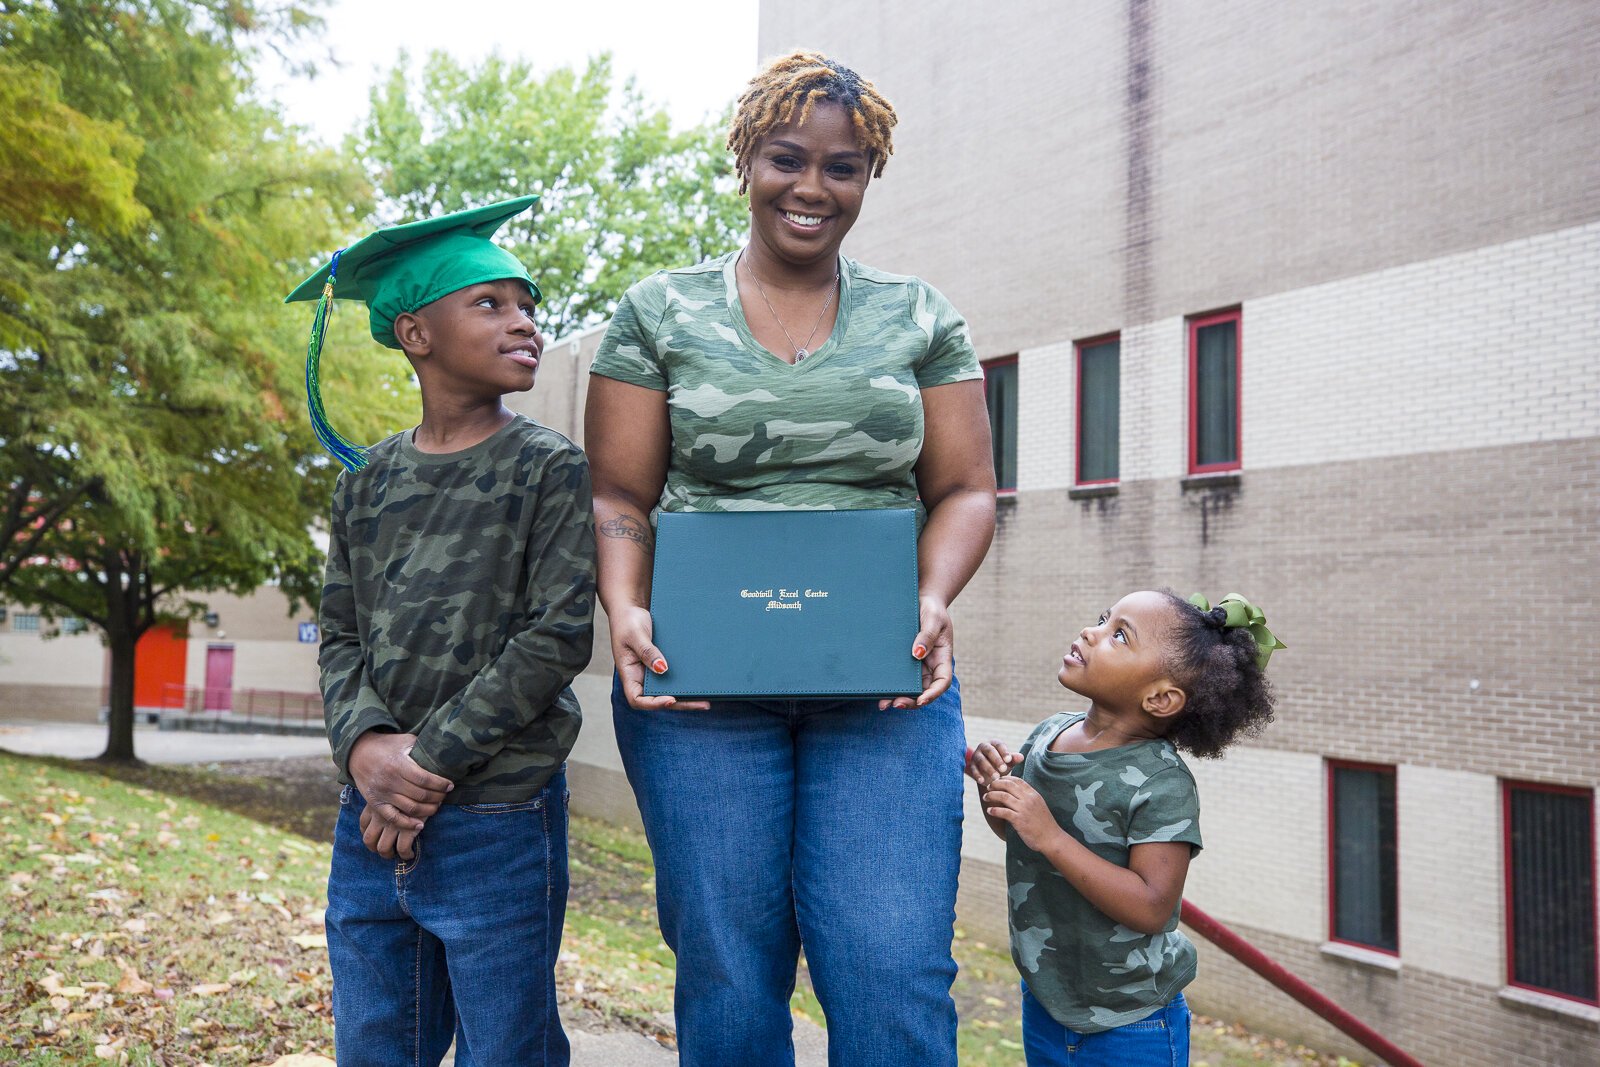 Marquetta Wilson poses with her children and her high school diploma. Wilson earned her diploma from the Goodwill Excel Center in June 2020 at 30 years old. Excel's adult learning program is free to participants. (Ziggy Mack)